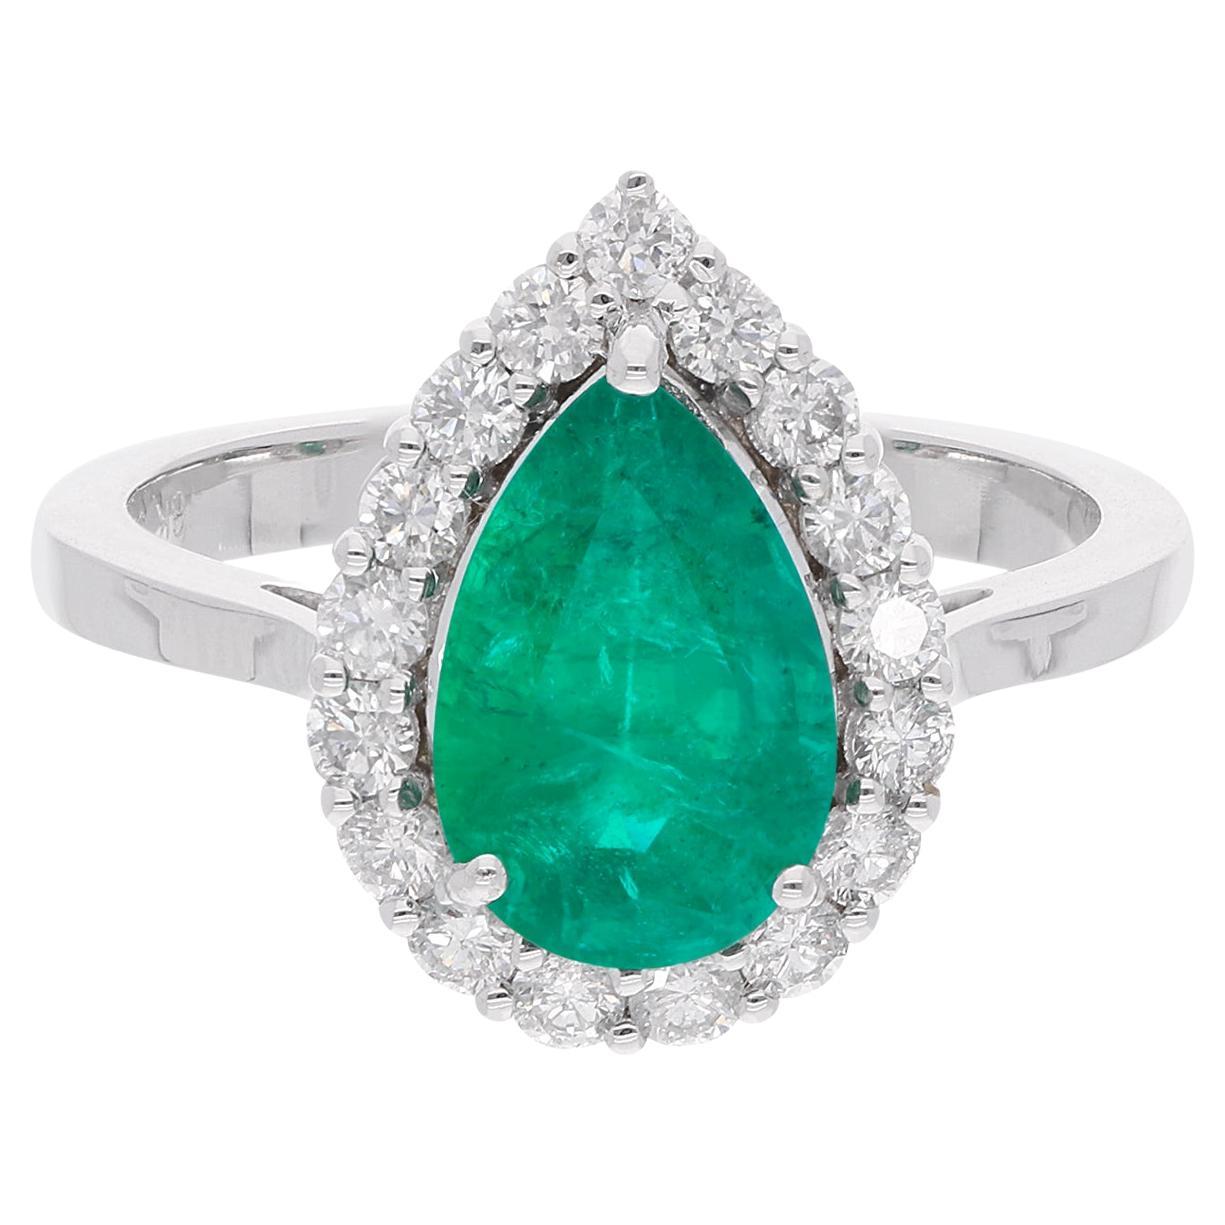 Pear Natural Emerald Gemstone Cocktail Ring Diamond 18 Karat White Gold Jewelry For Sale